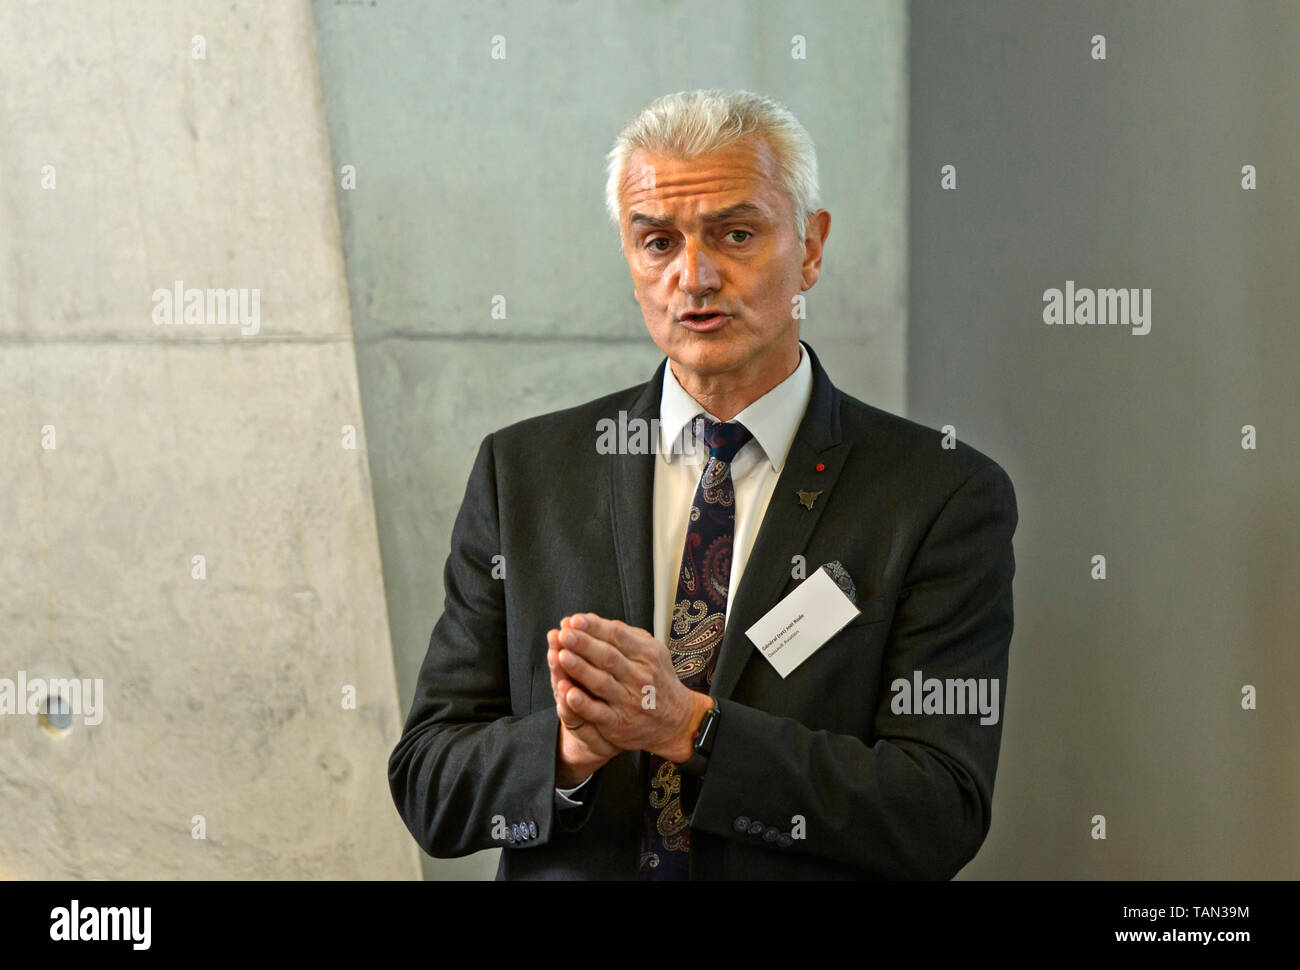 Joel Rode, General (Rtd.) and Advisor at Dassault Aviation, promotion event for the Rafale aircraft, AIR2030, Payerne, Switzerland Stock Photo